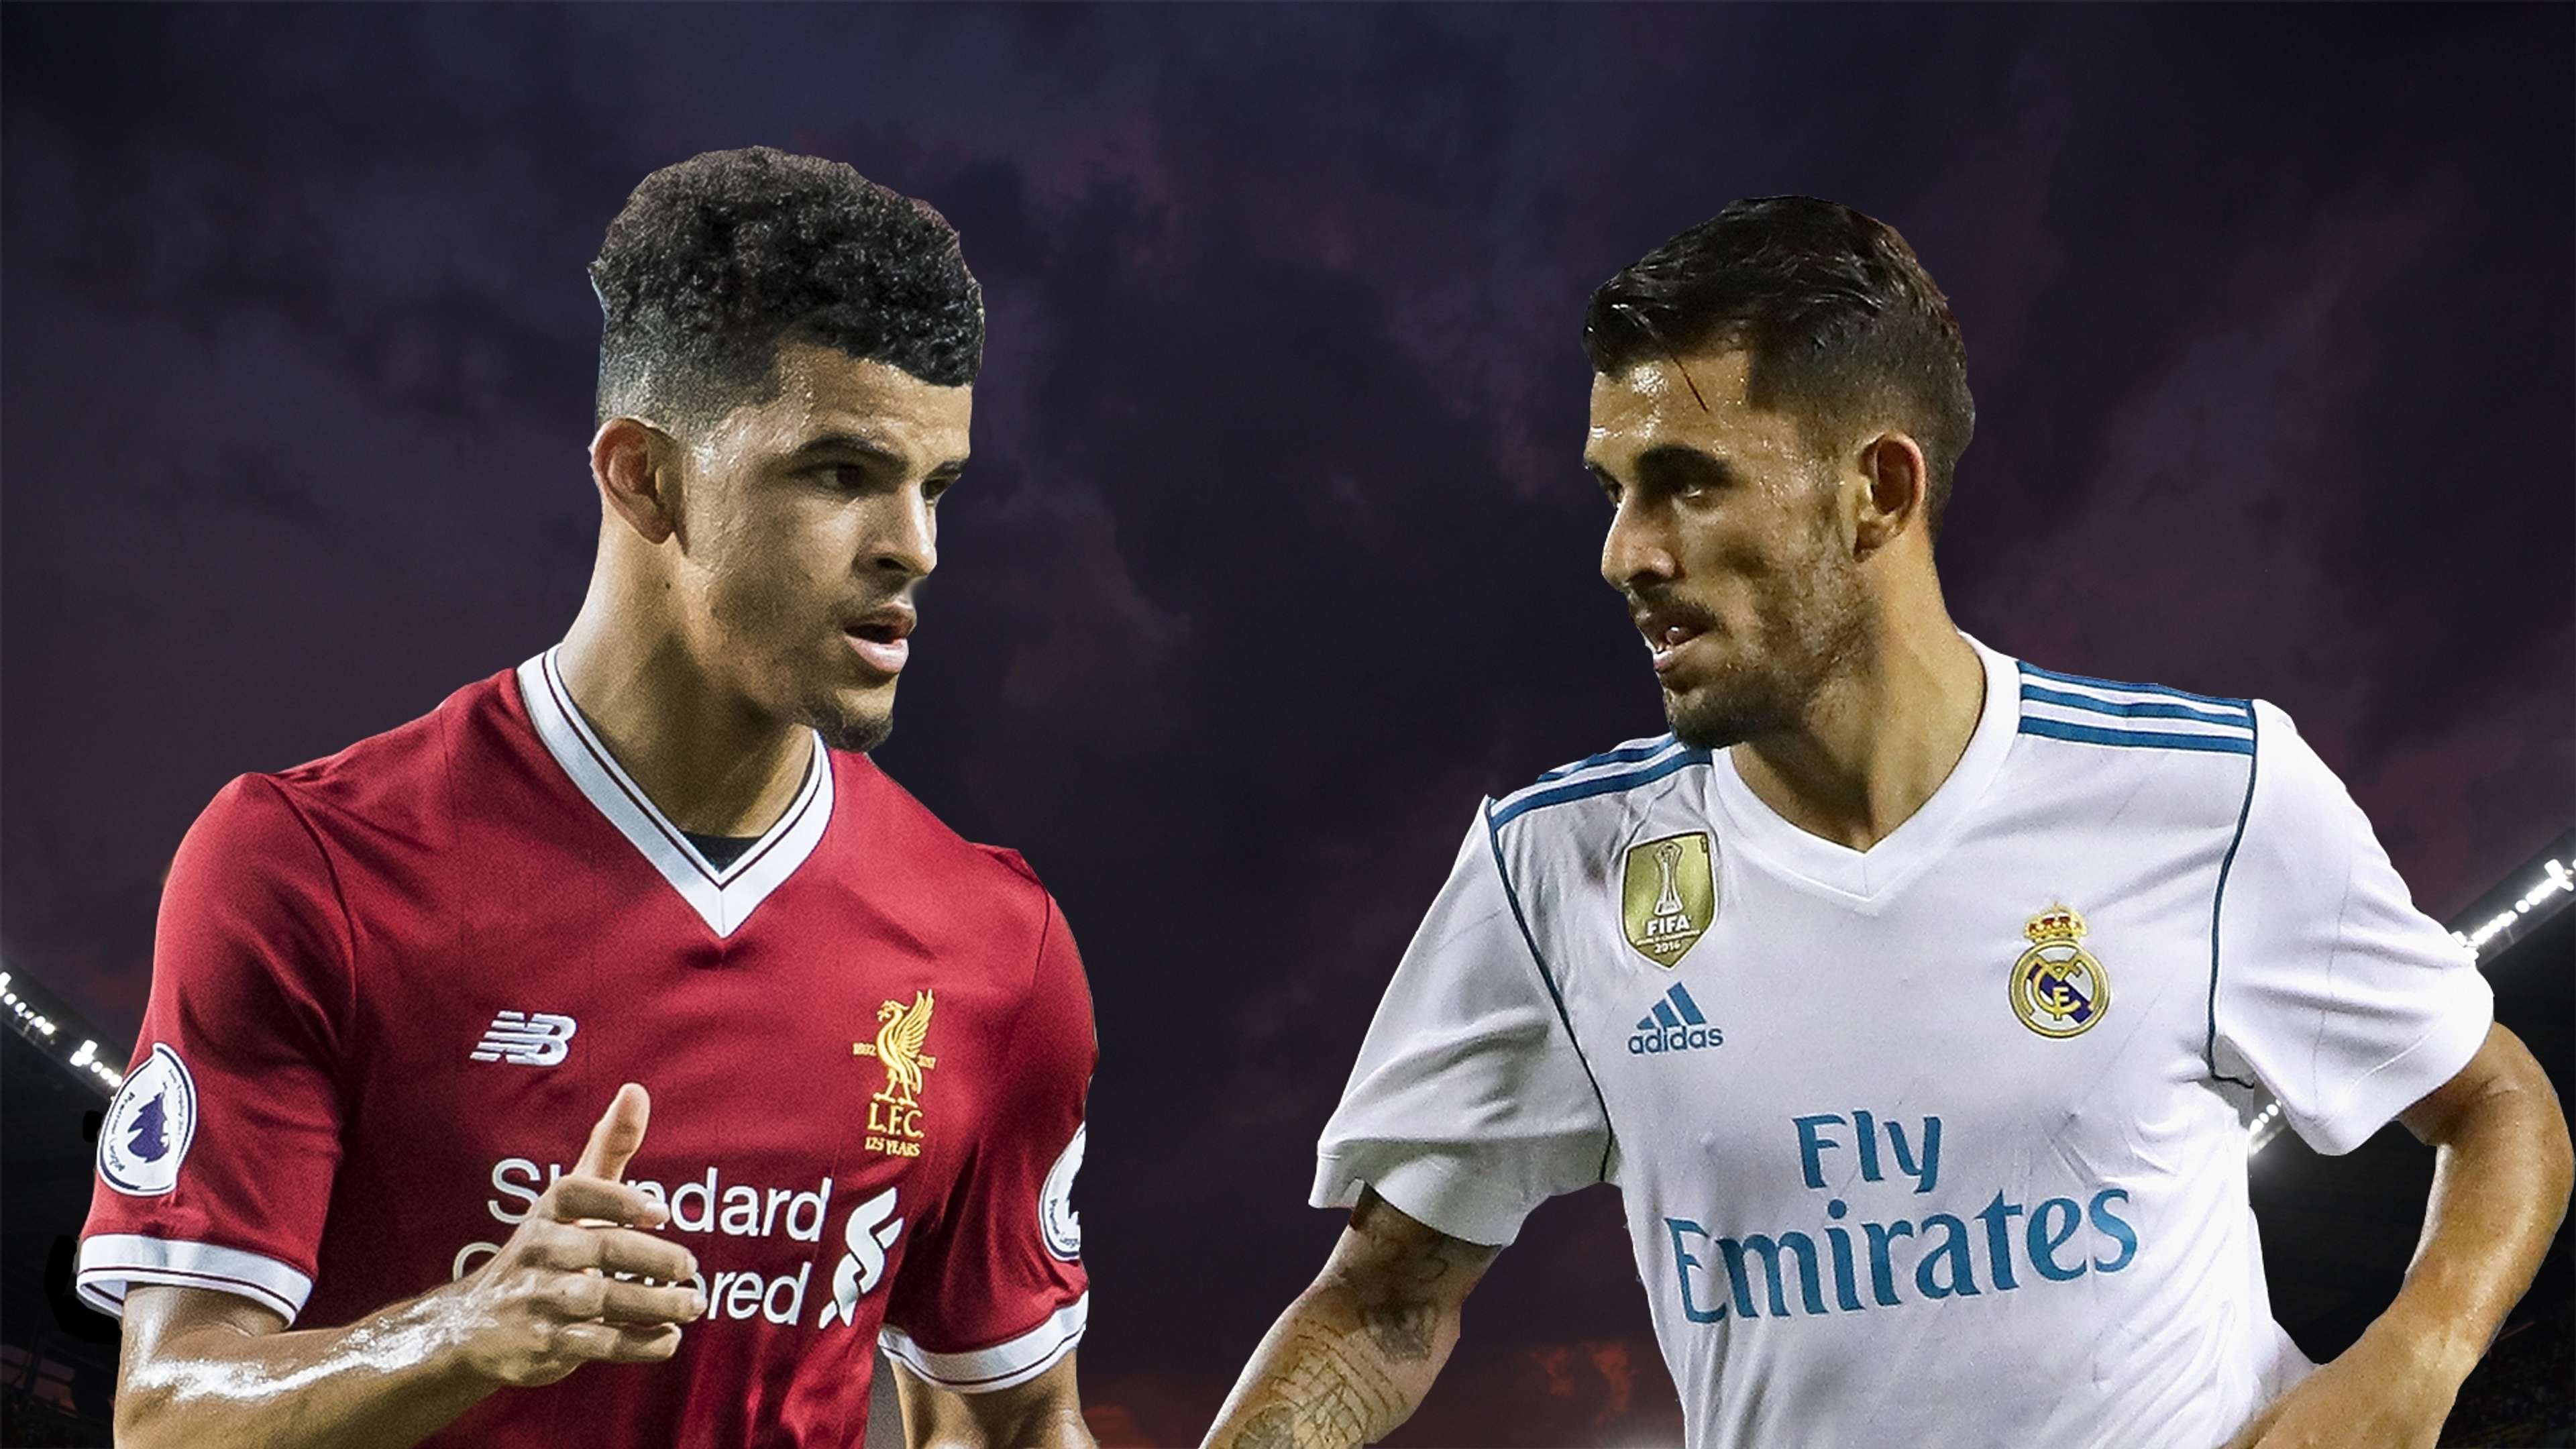 Solanke Ceballs Young stars to watch